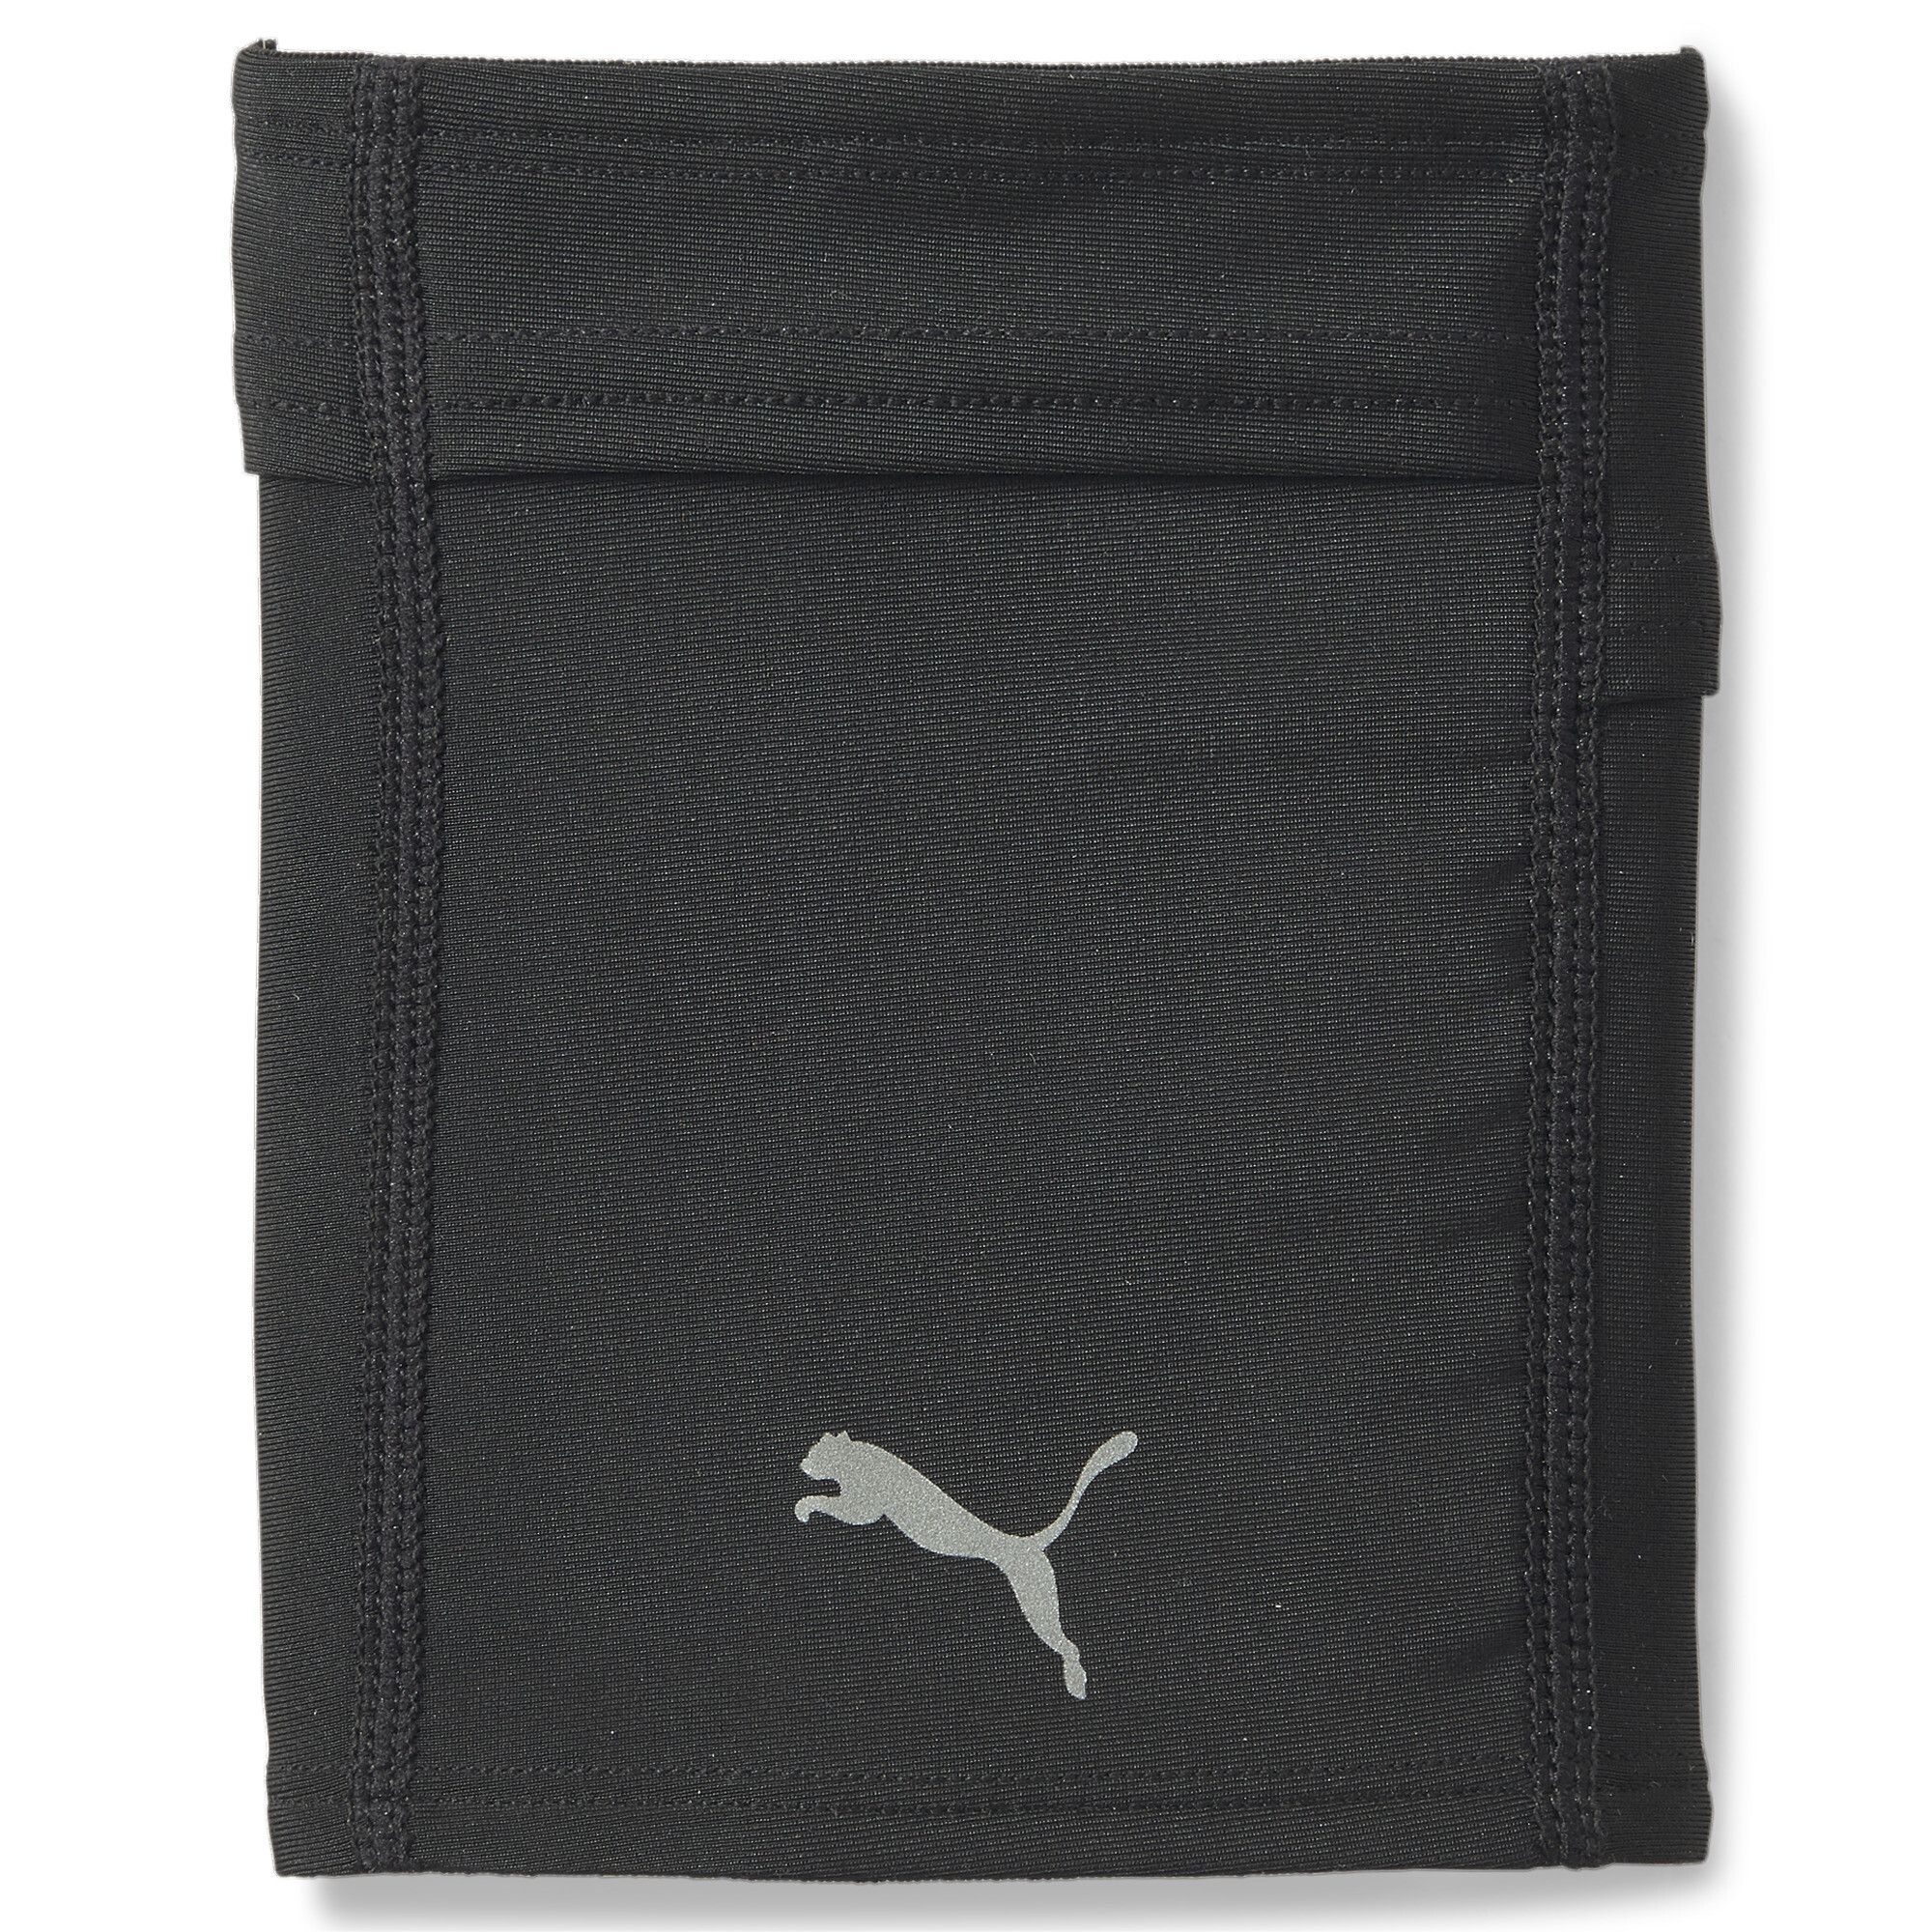 Men's PUMA Running Armband In 10 - Black, Size Small